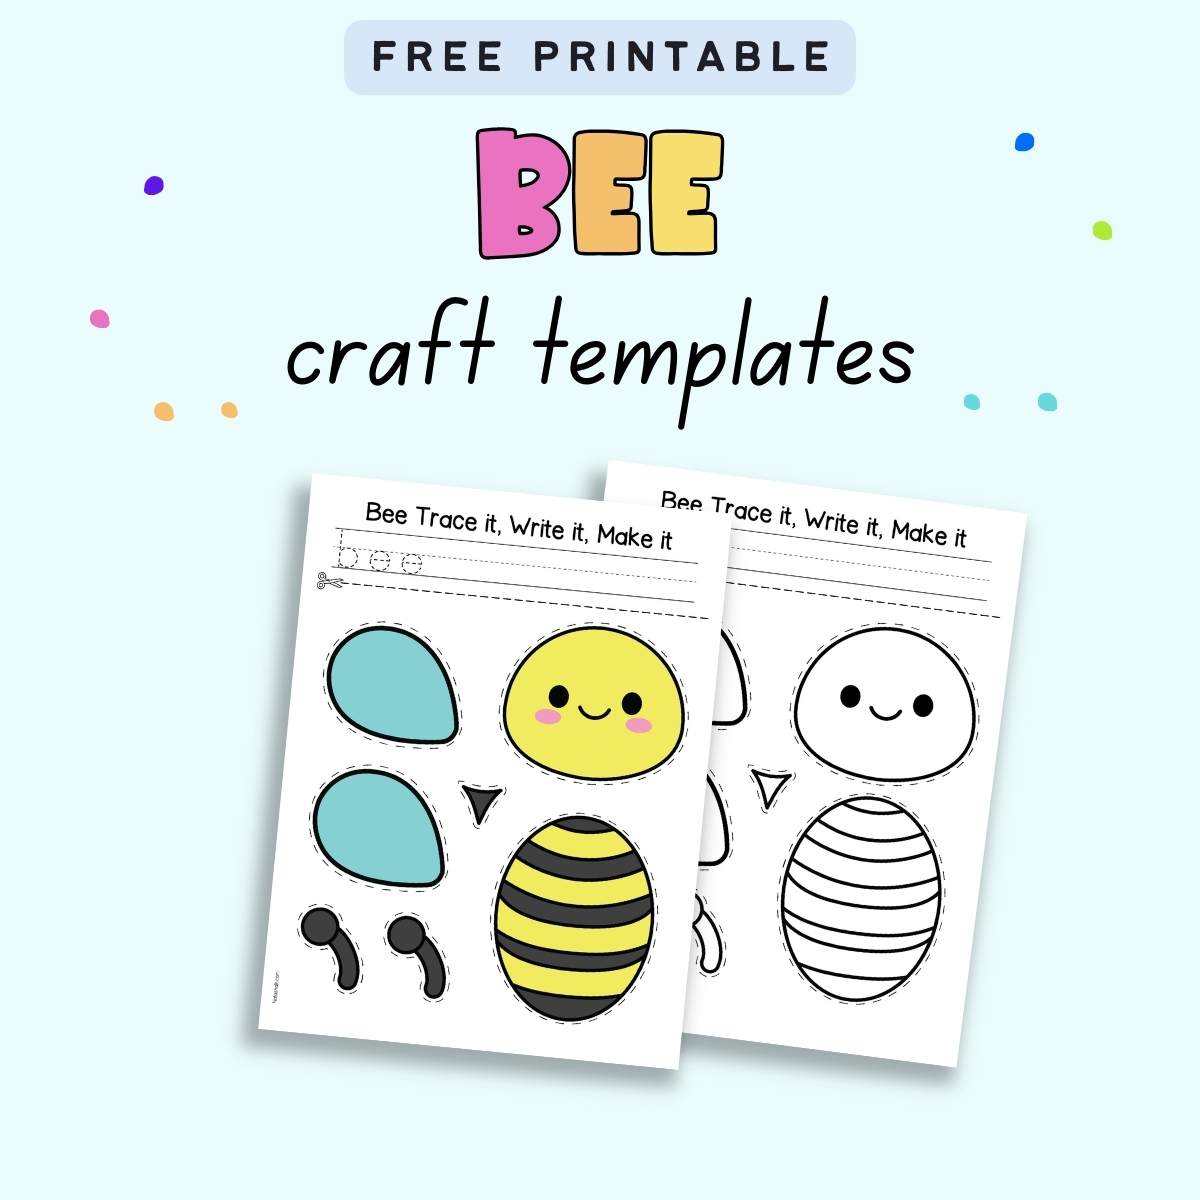 Text "free printable bee craft templates" with a preview of two pages of printable bee cut and paste craft. One is color and the other black and white.